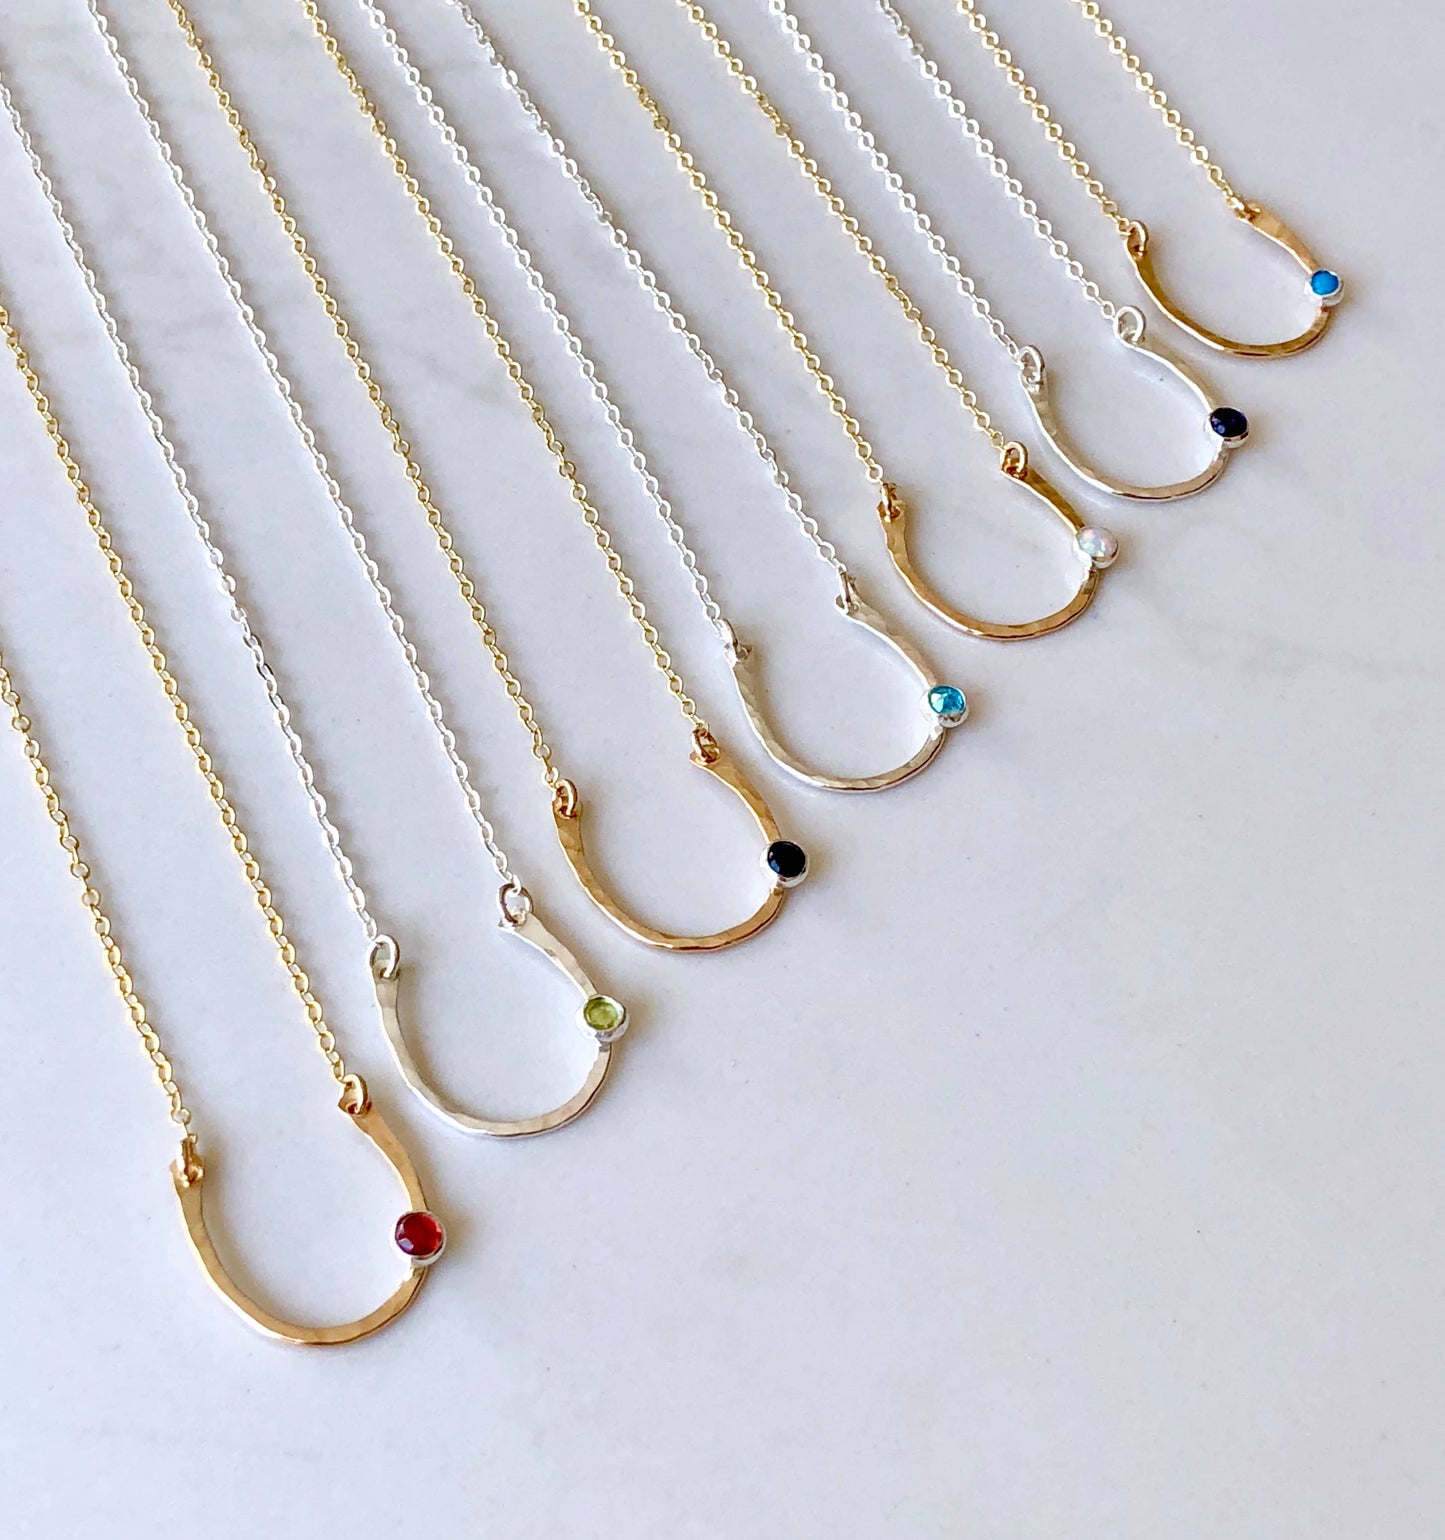 Lucky horseshoe necklace-sterling silver: Opal